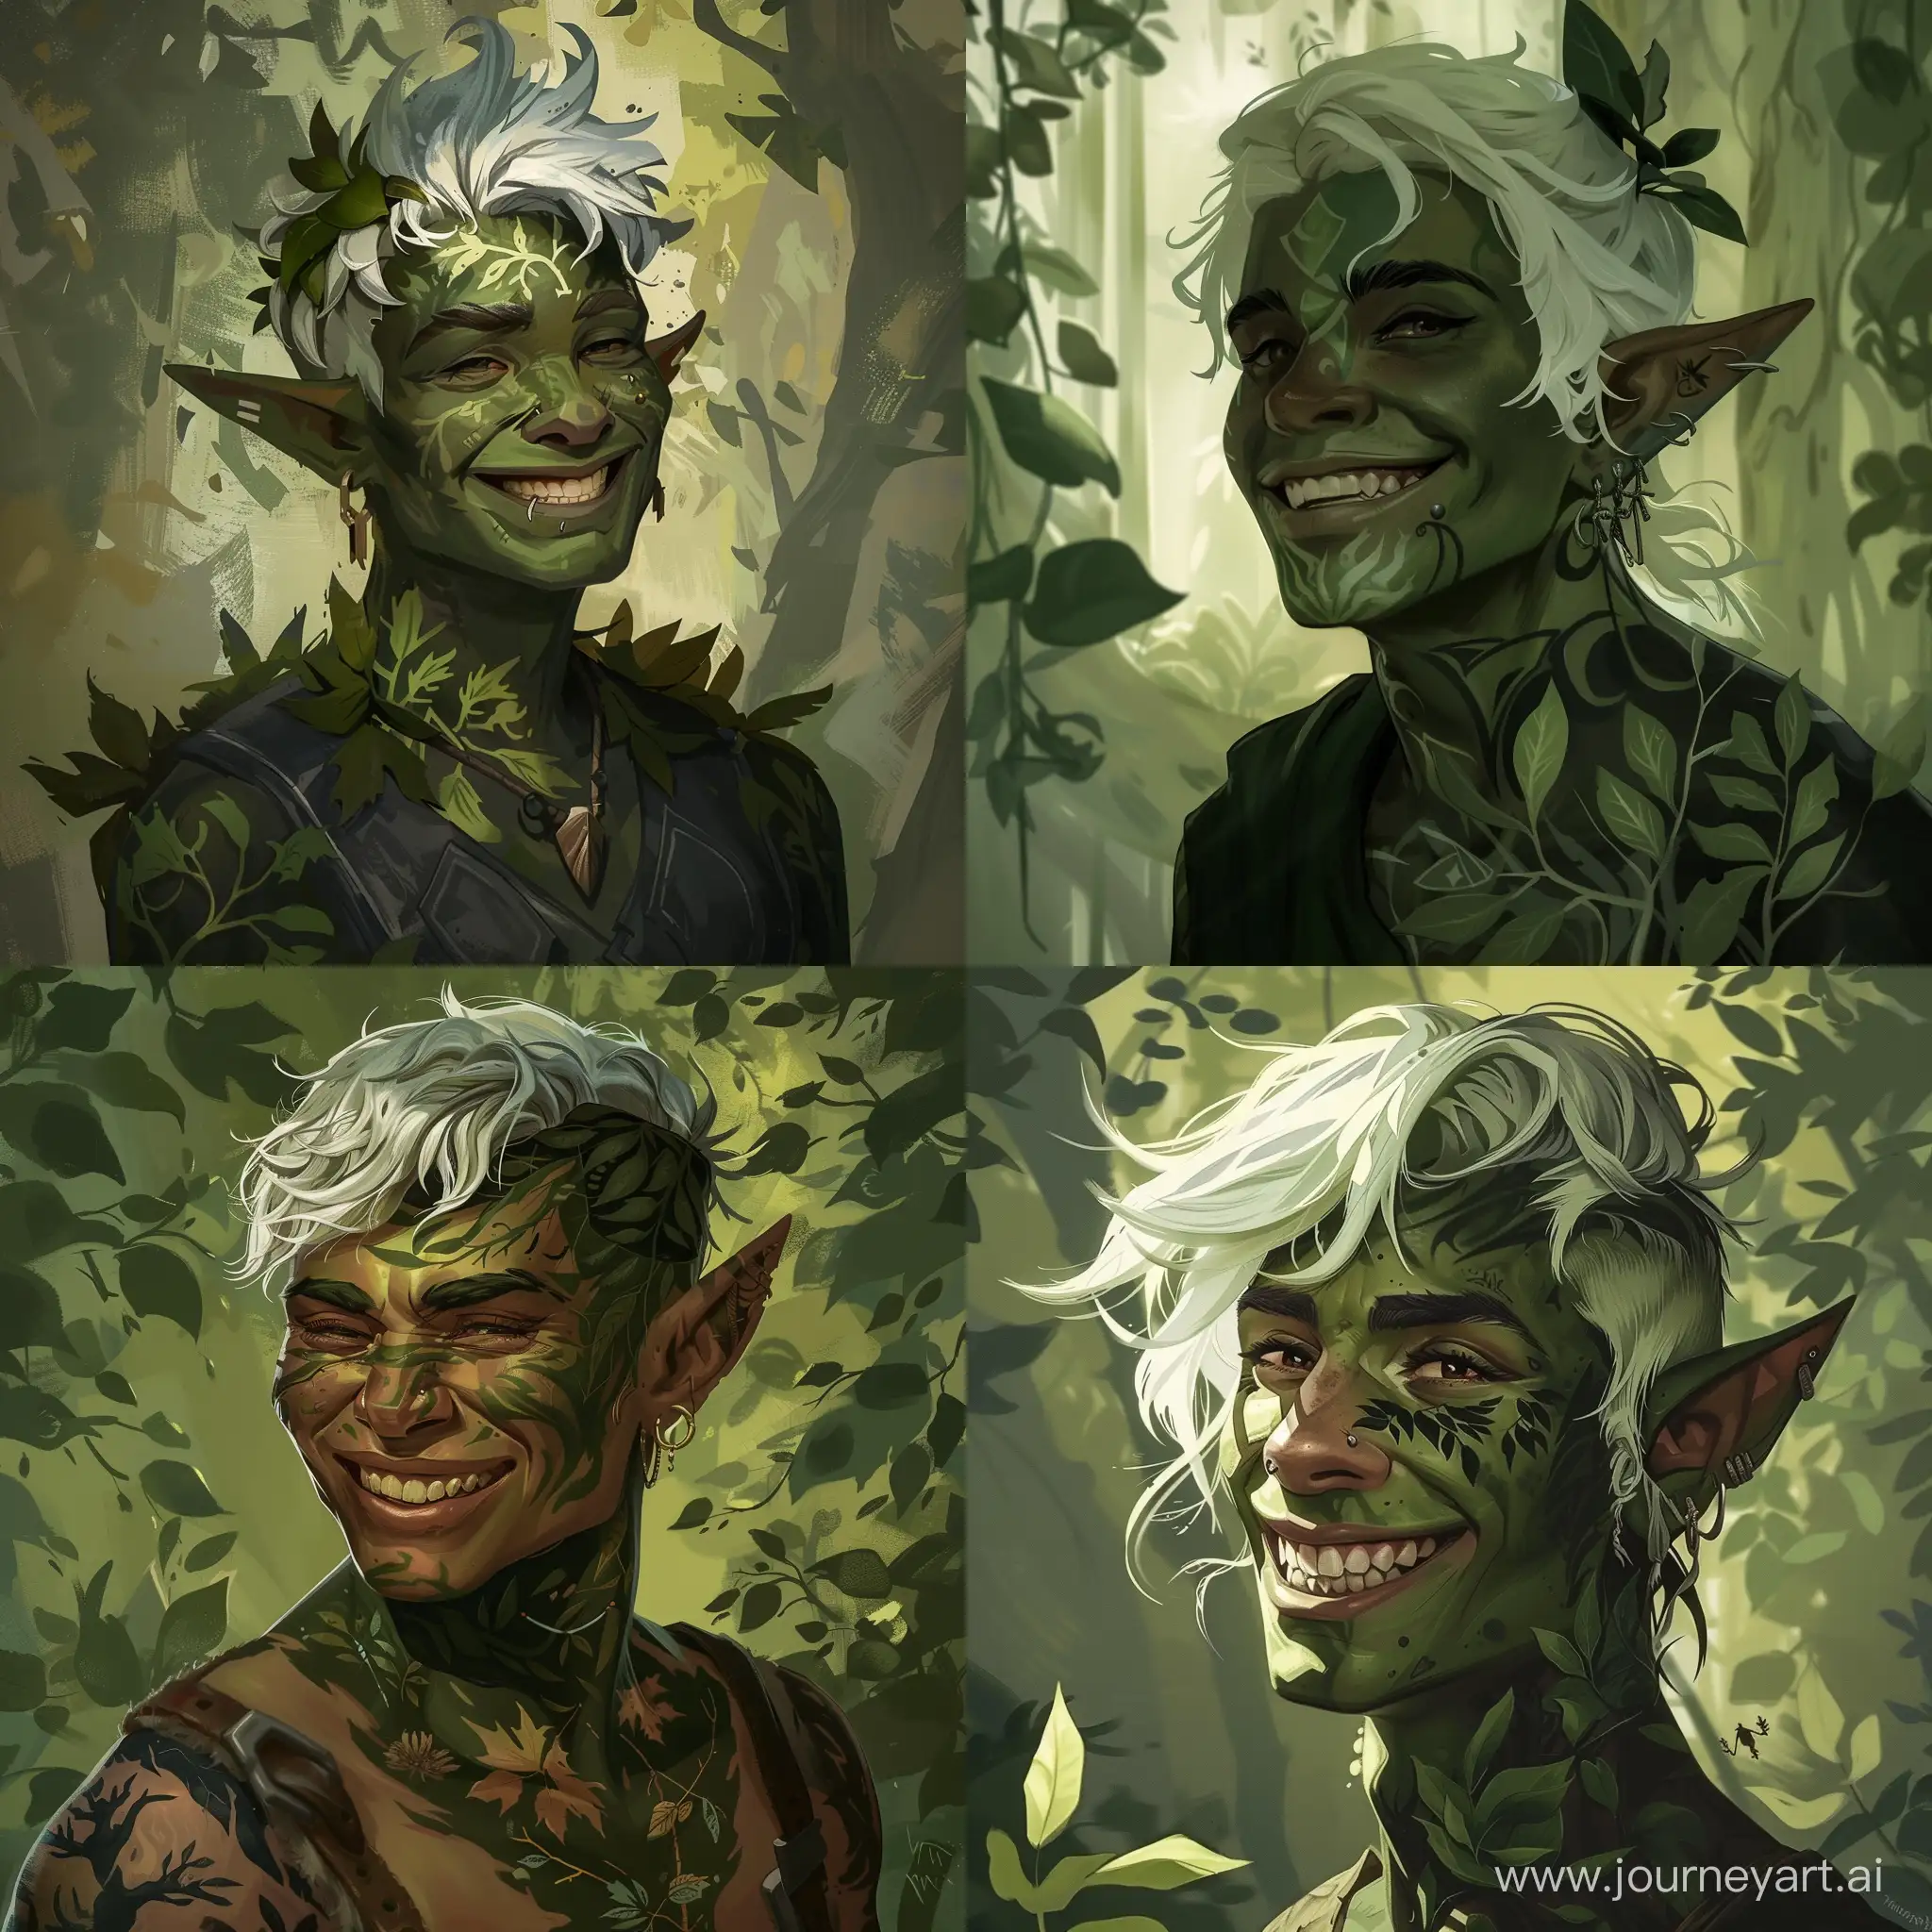 Kind-HalfOrc-with-Leaf-and-Tree-Tattoos-Smiling